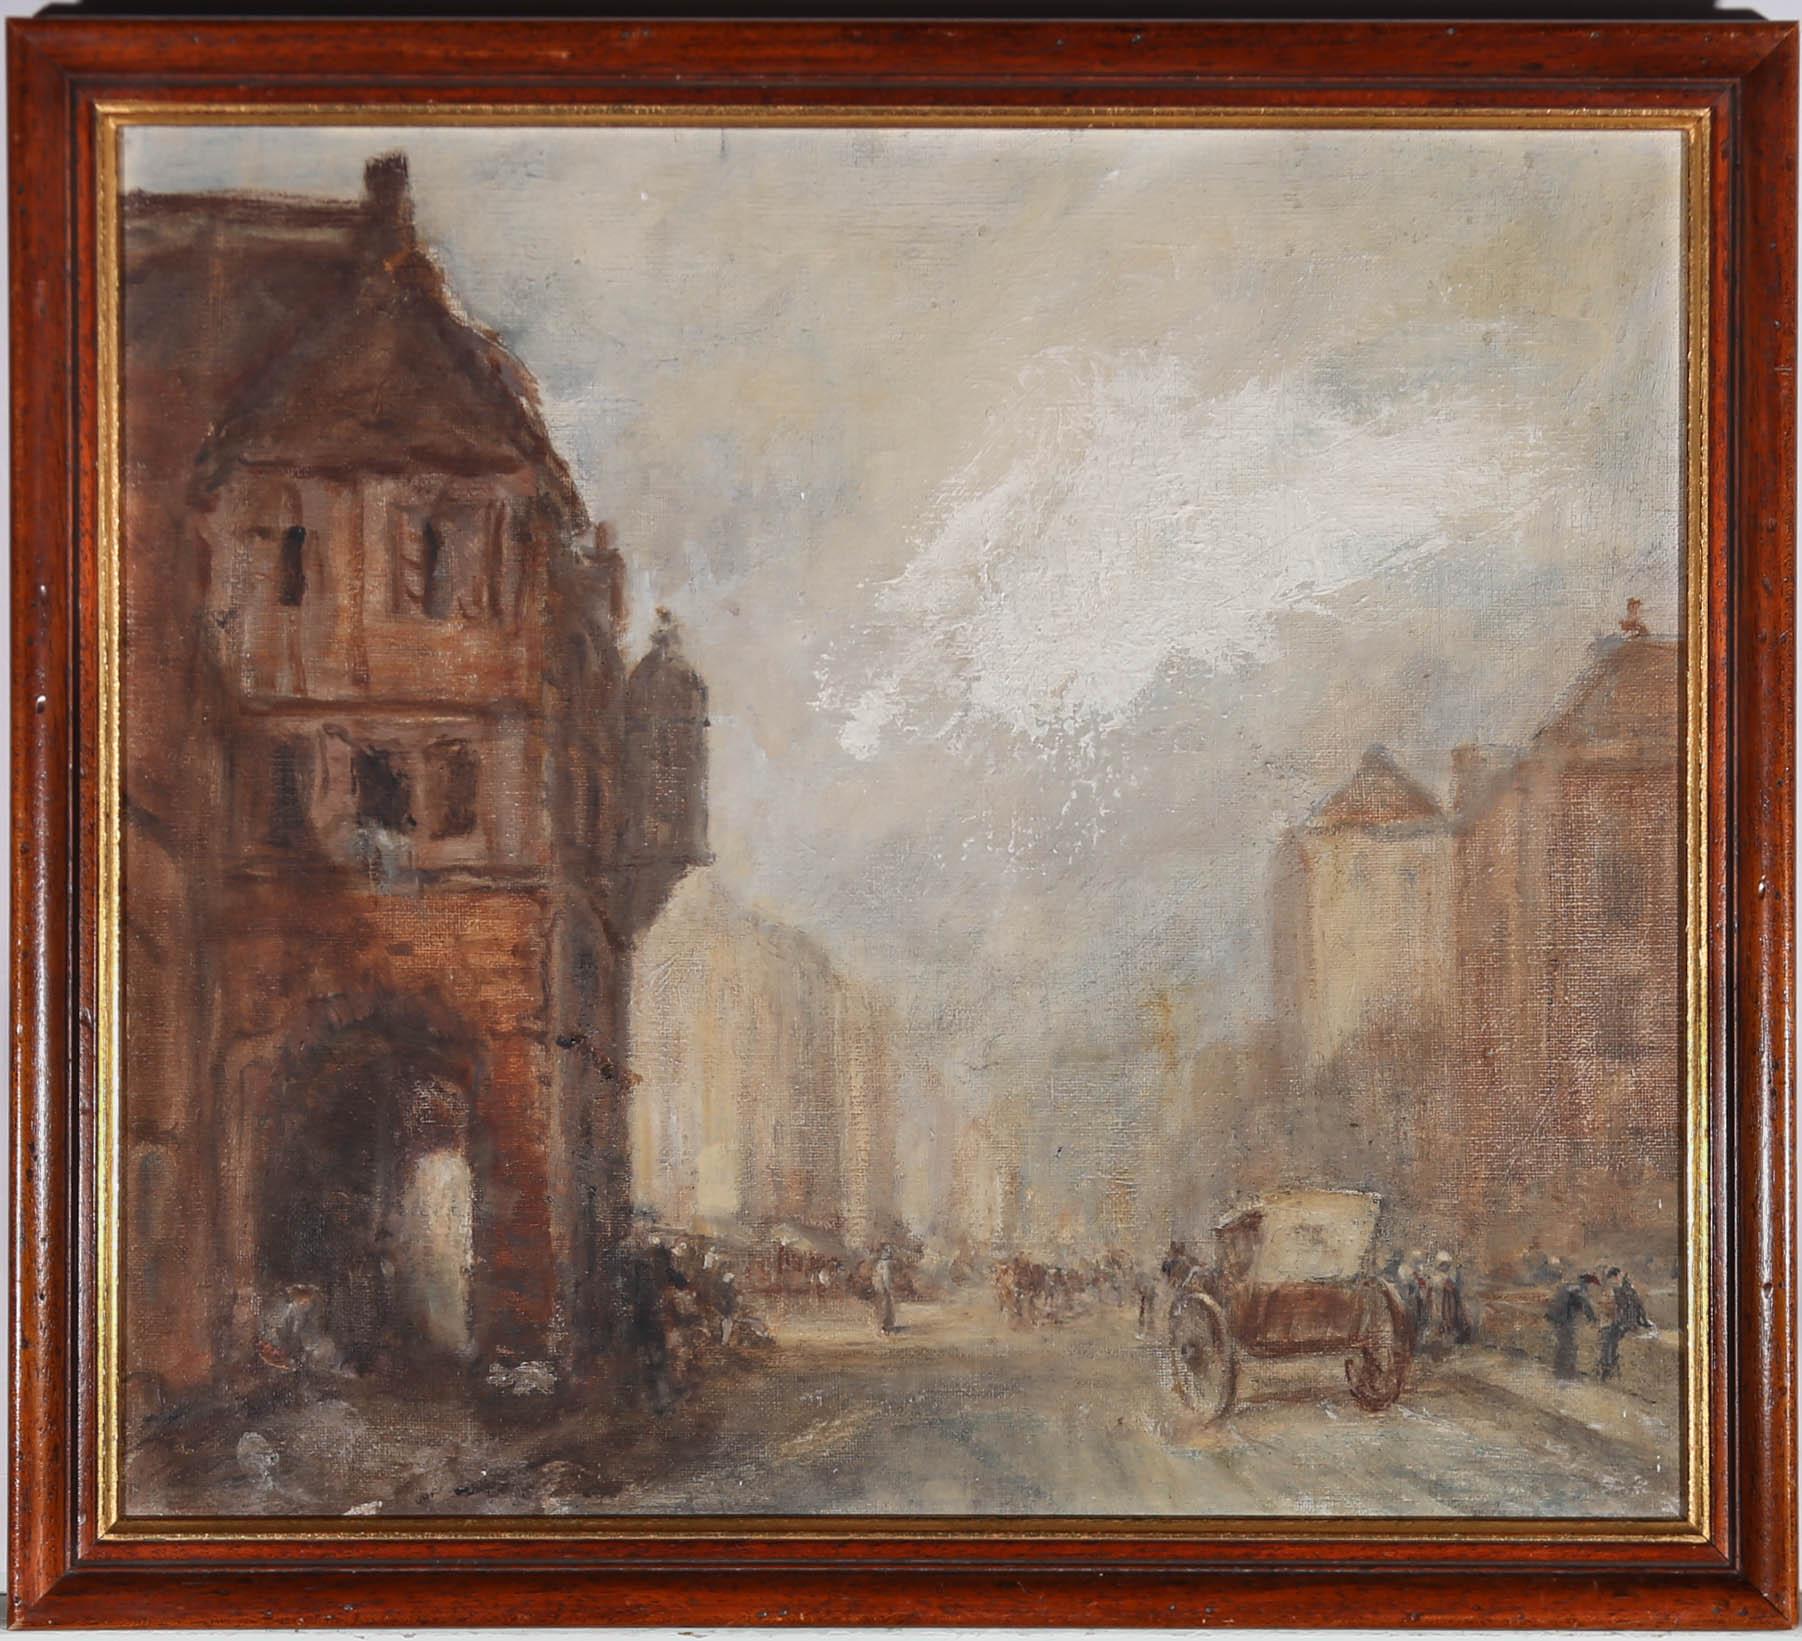 An atmospheric study of a bustling city street in the early 20th century. The road is filled with horse carts and figures walking to market. Unsigned. Presented in a wooden frame with a gilt slip. On canvas.
